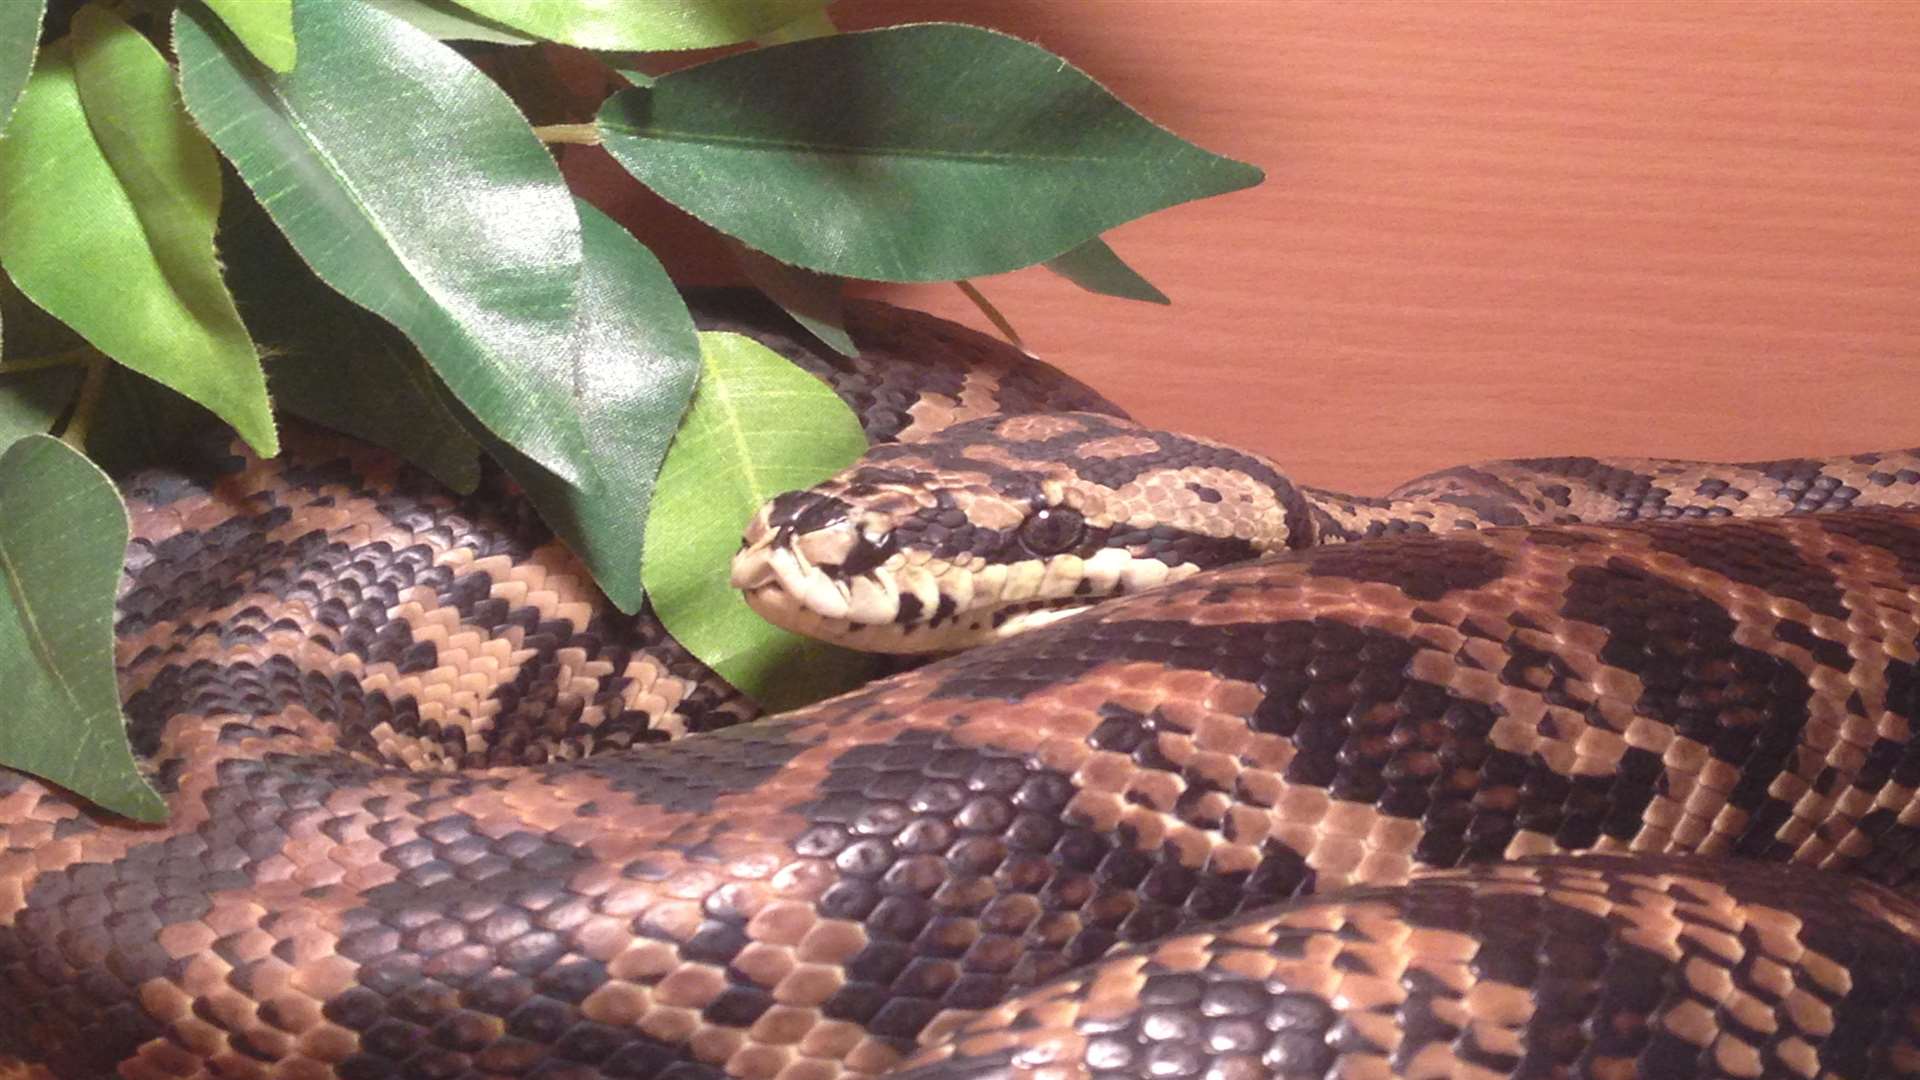 Six foot python on the loose in Maidstone